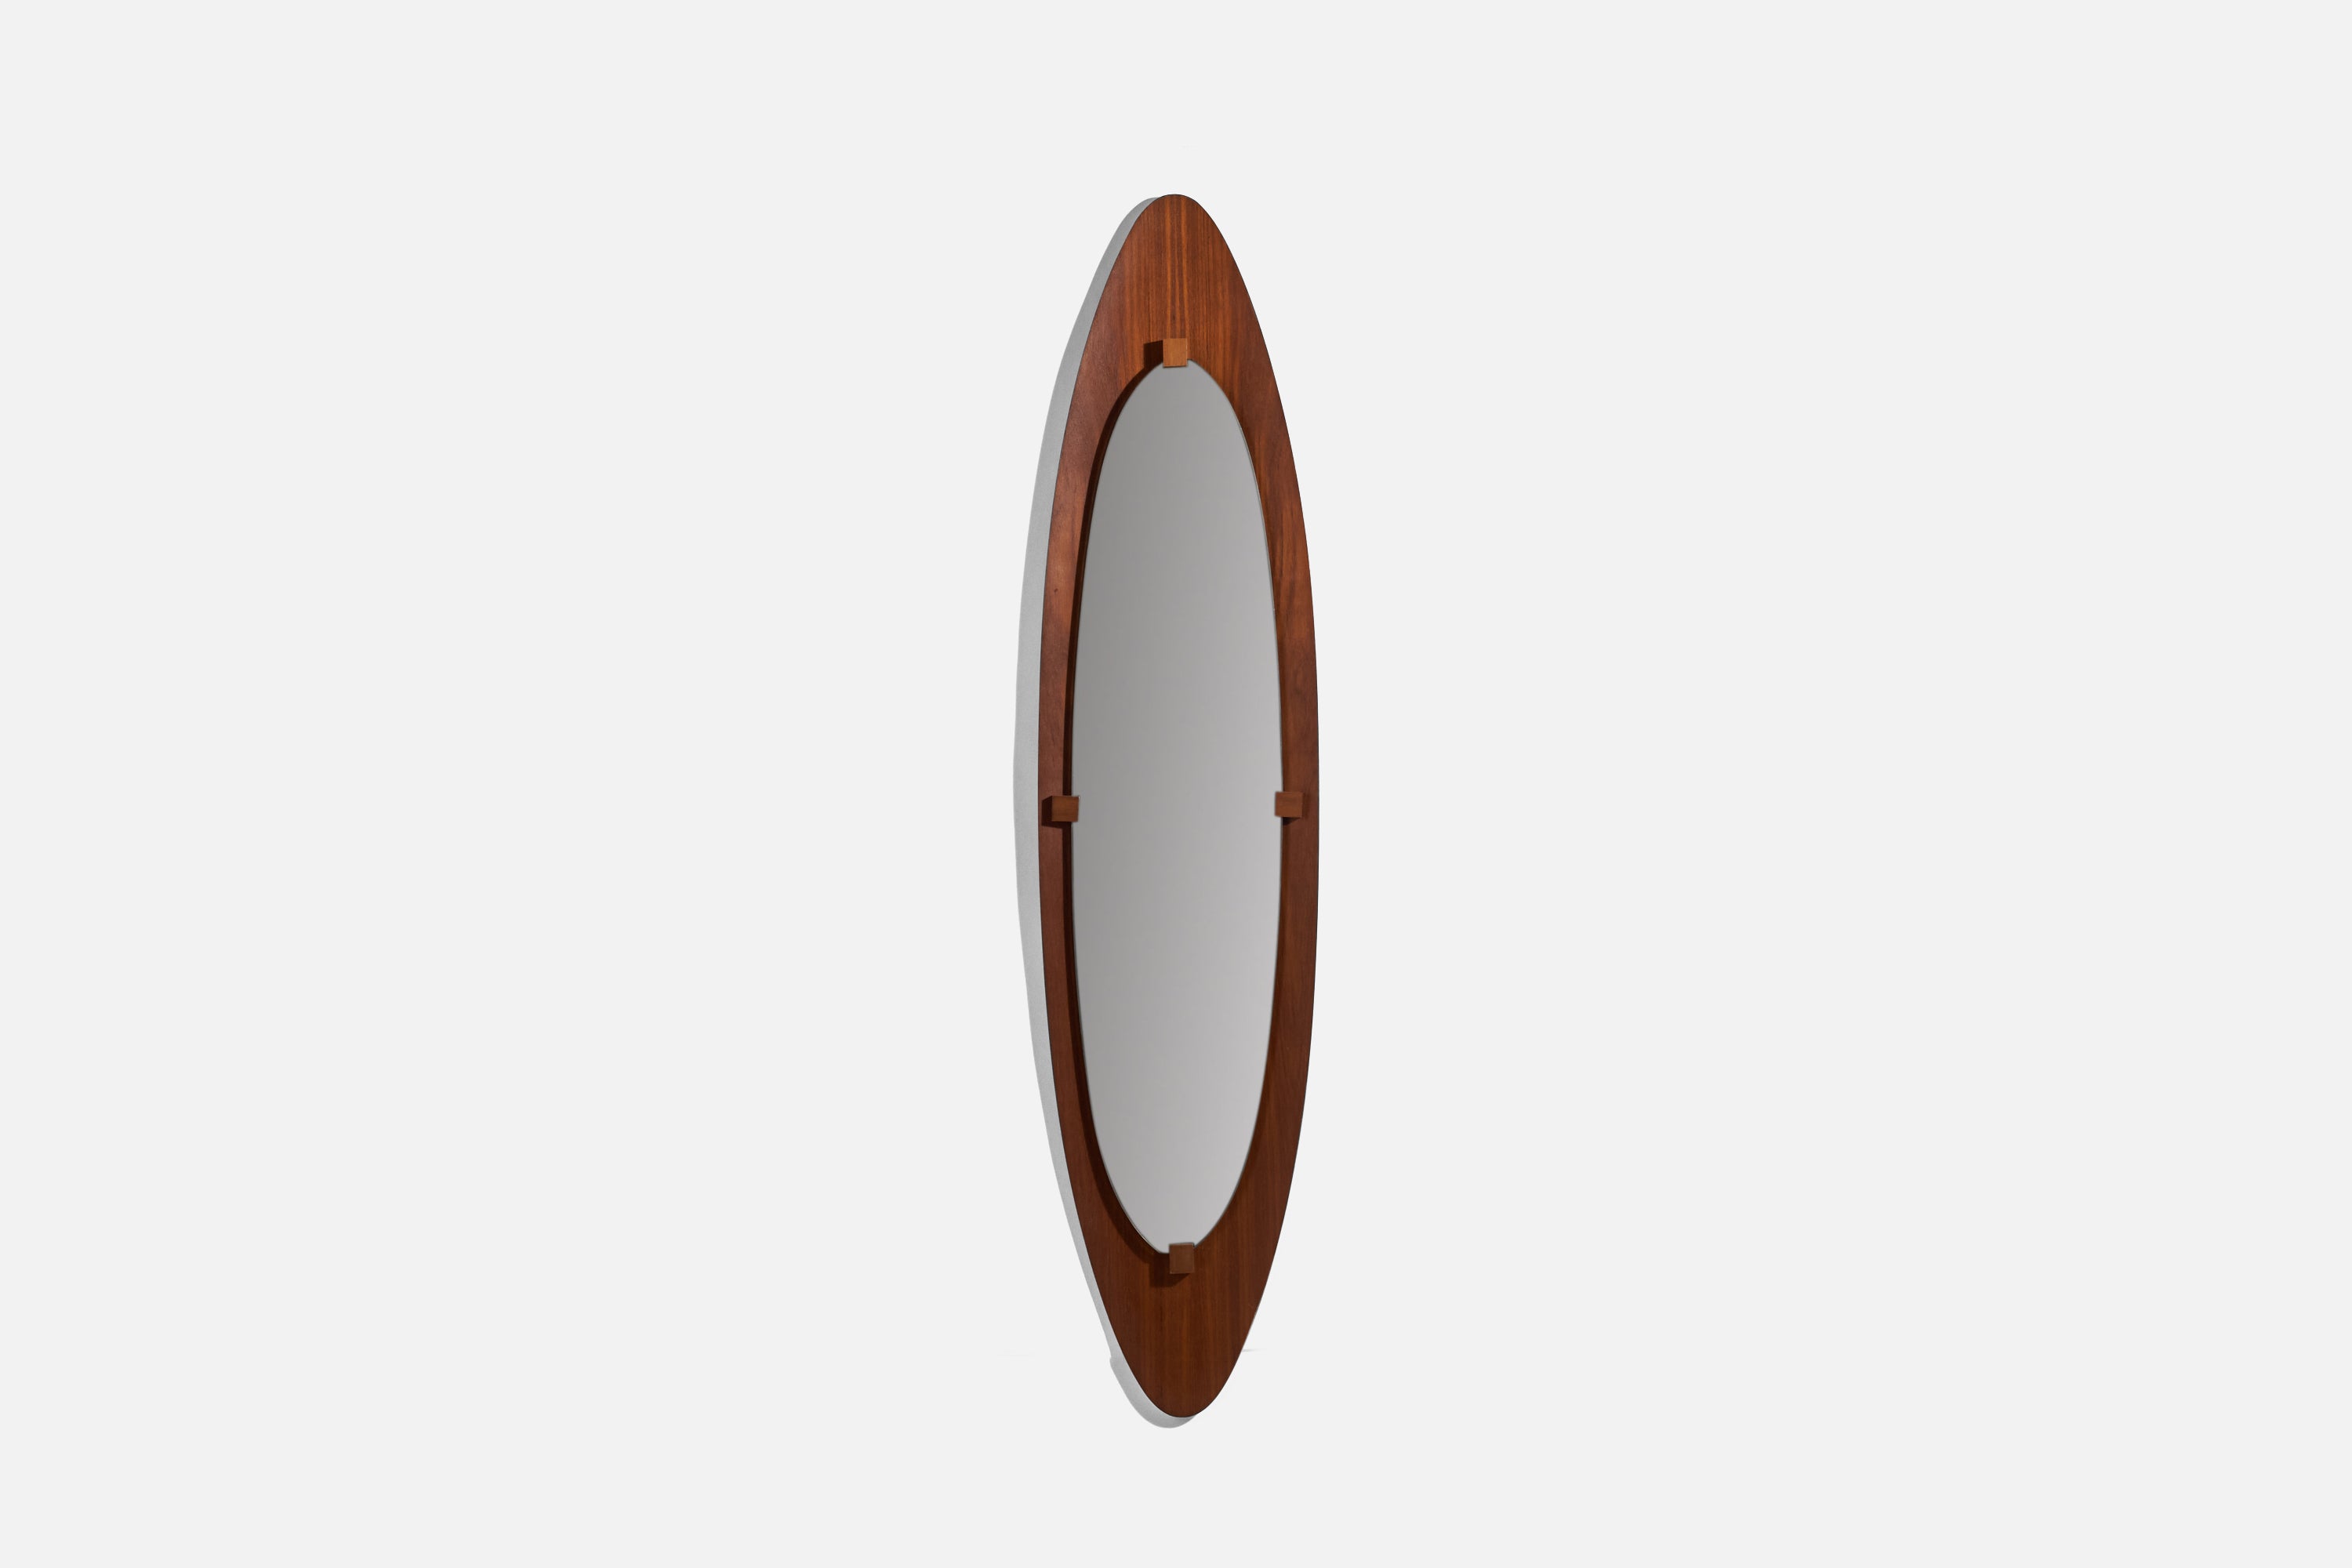 Campo & Graffi 'Attributed', Wall Mirror, Teak, Mirror Glass, Italy, 1950s For Sale